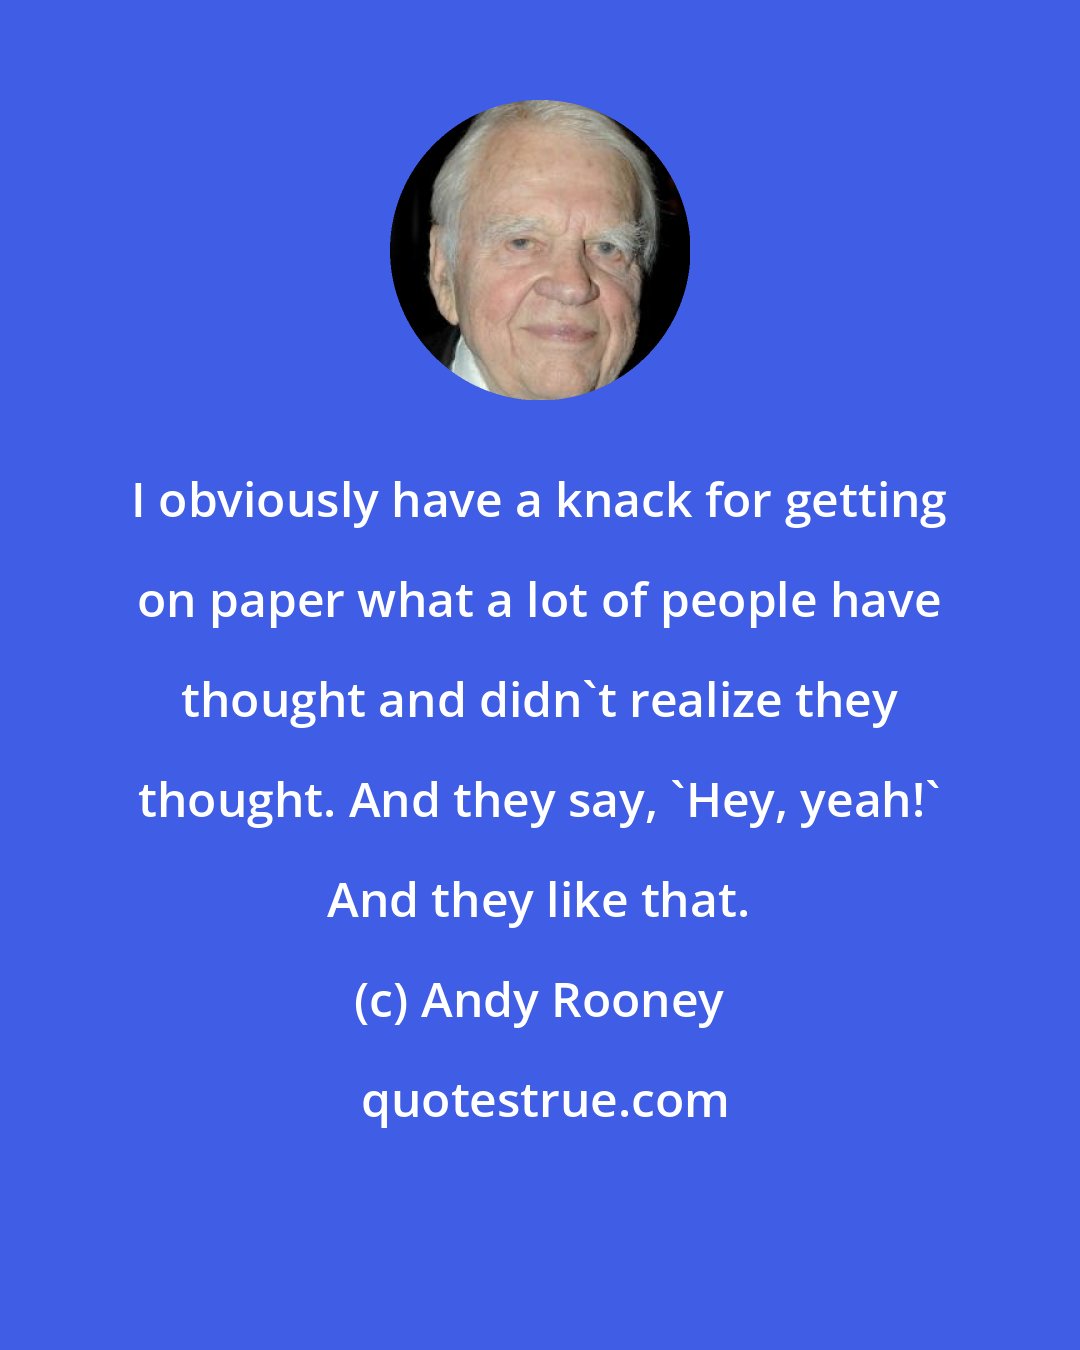 Andy Rooney: I obviously have a knack for getting on paper what a lot of people have thought and didn't realize they thought. And they say, 'Hey, yeah!' And they like that.